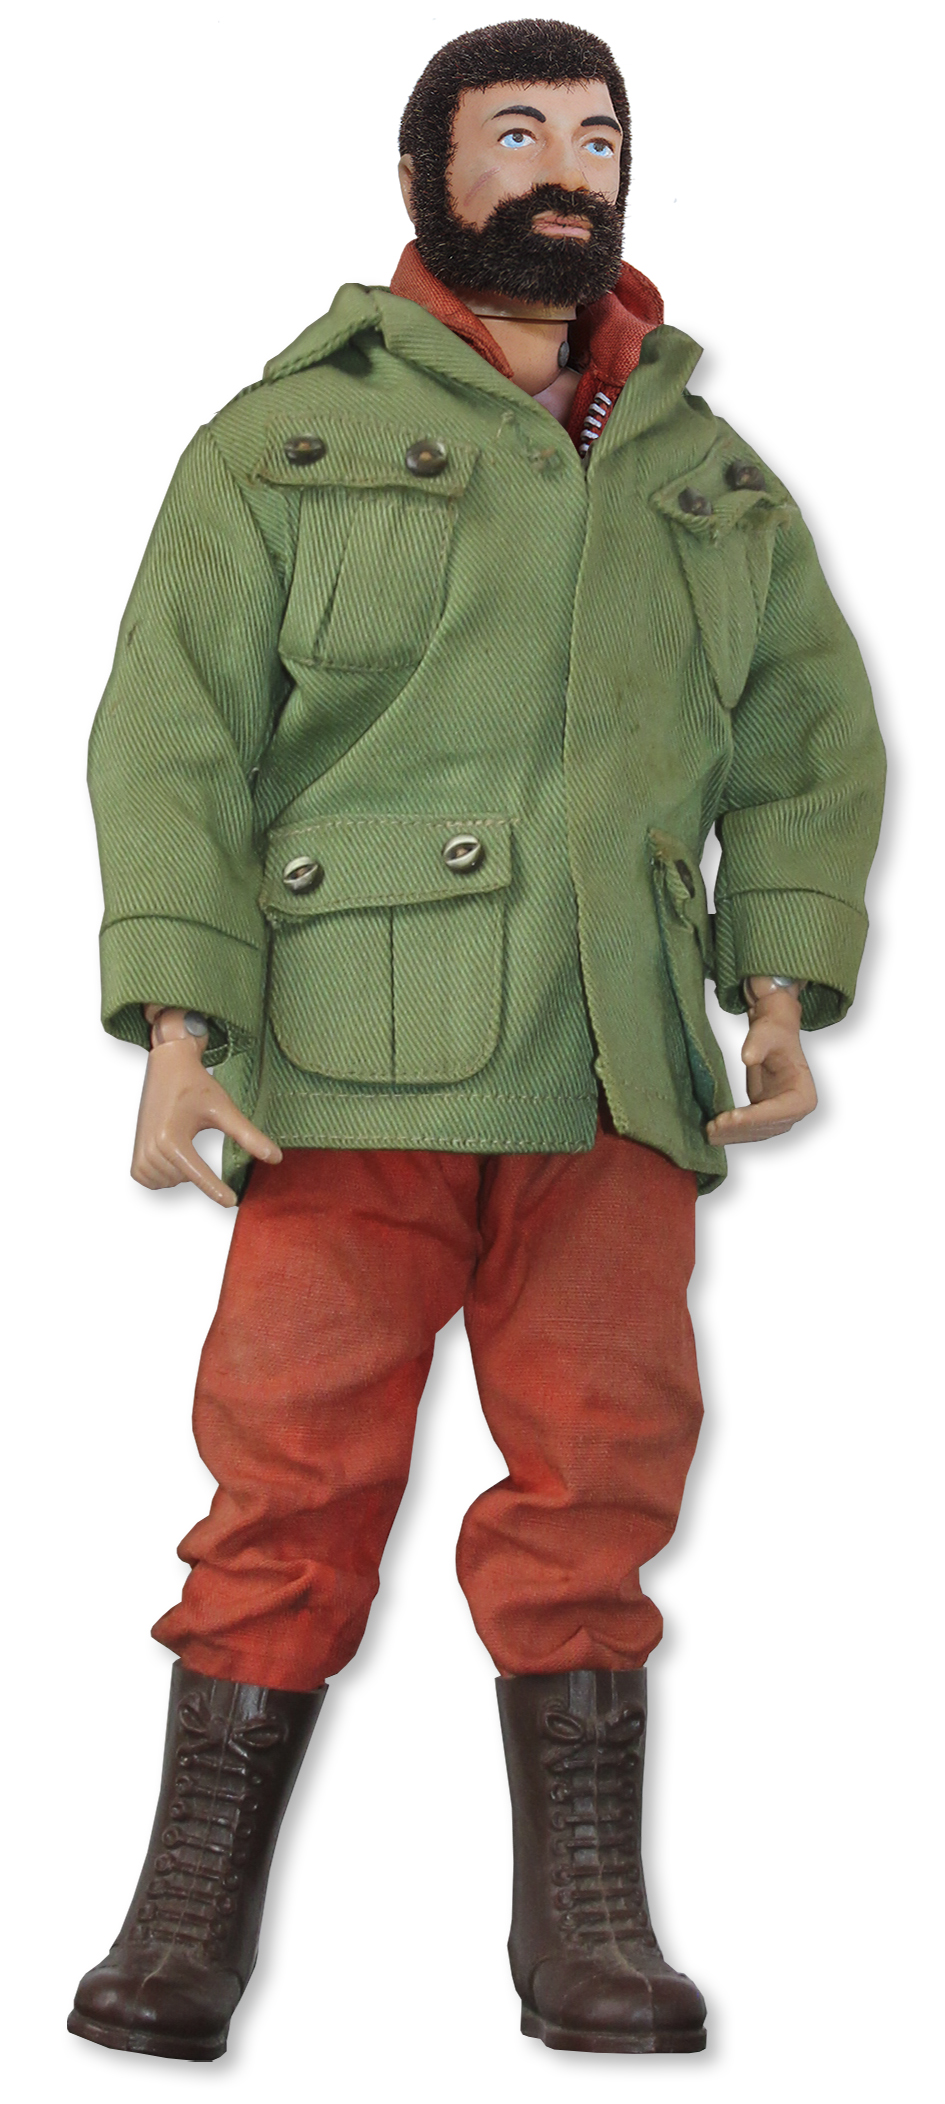 1964 G.I. Joe Prototype Action Figure -- ``Action Soldier`` With Original Hair Flocking -- From The